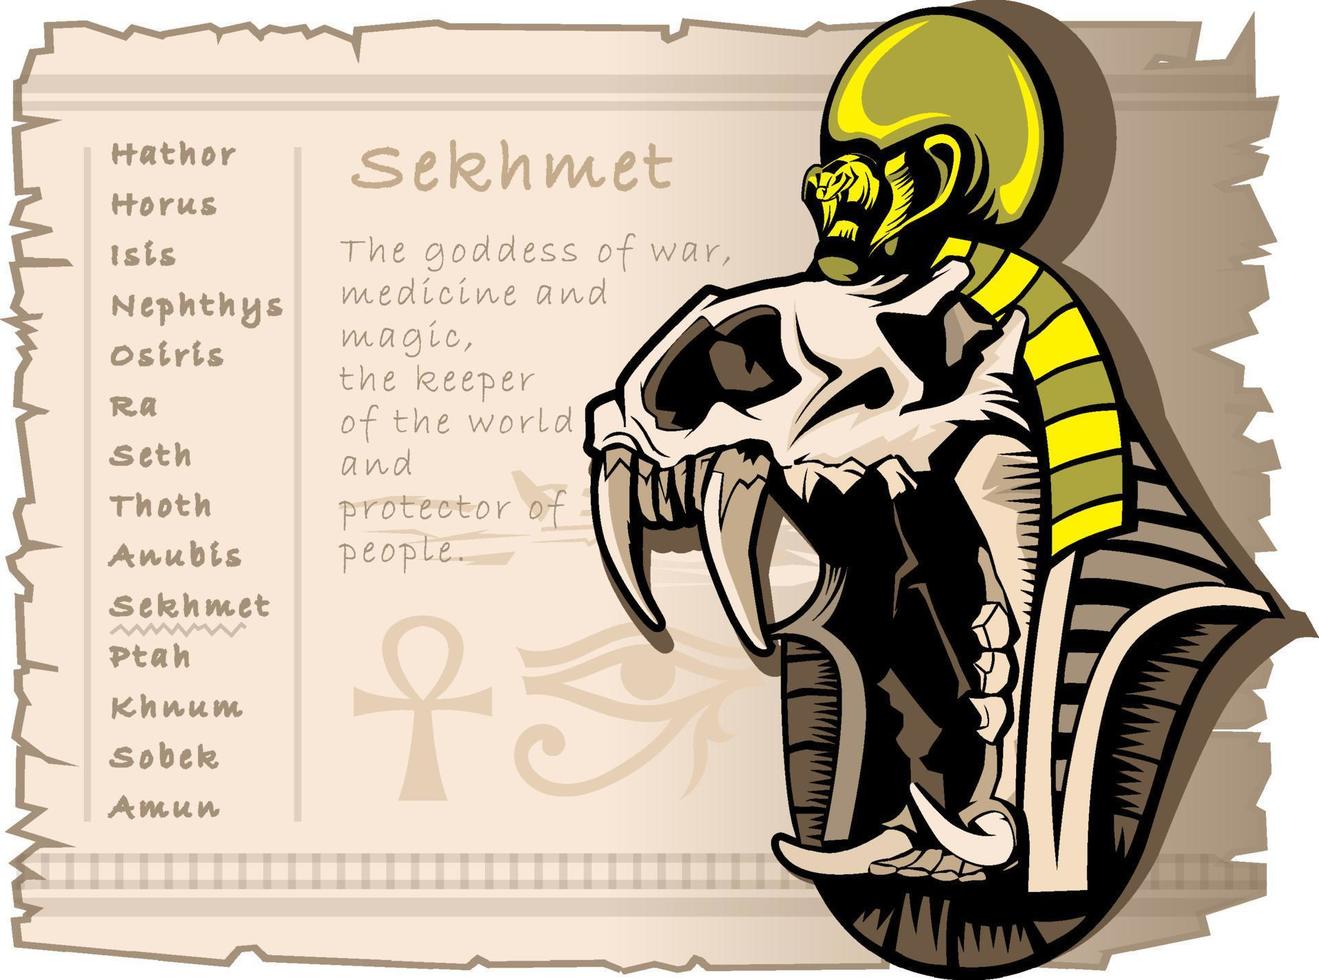 Sekhmet goddess of war in the ancient Egyptian world. Tattoo template and T-shirts. vector